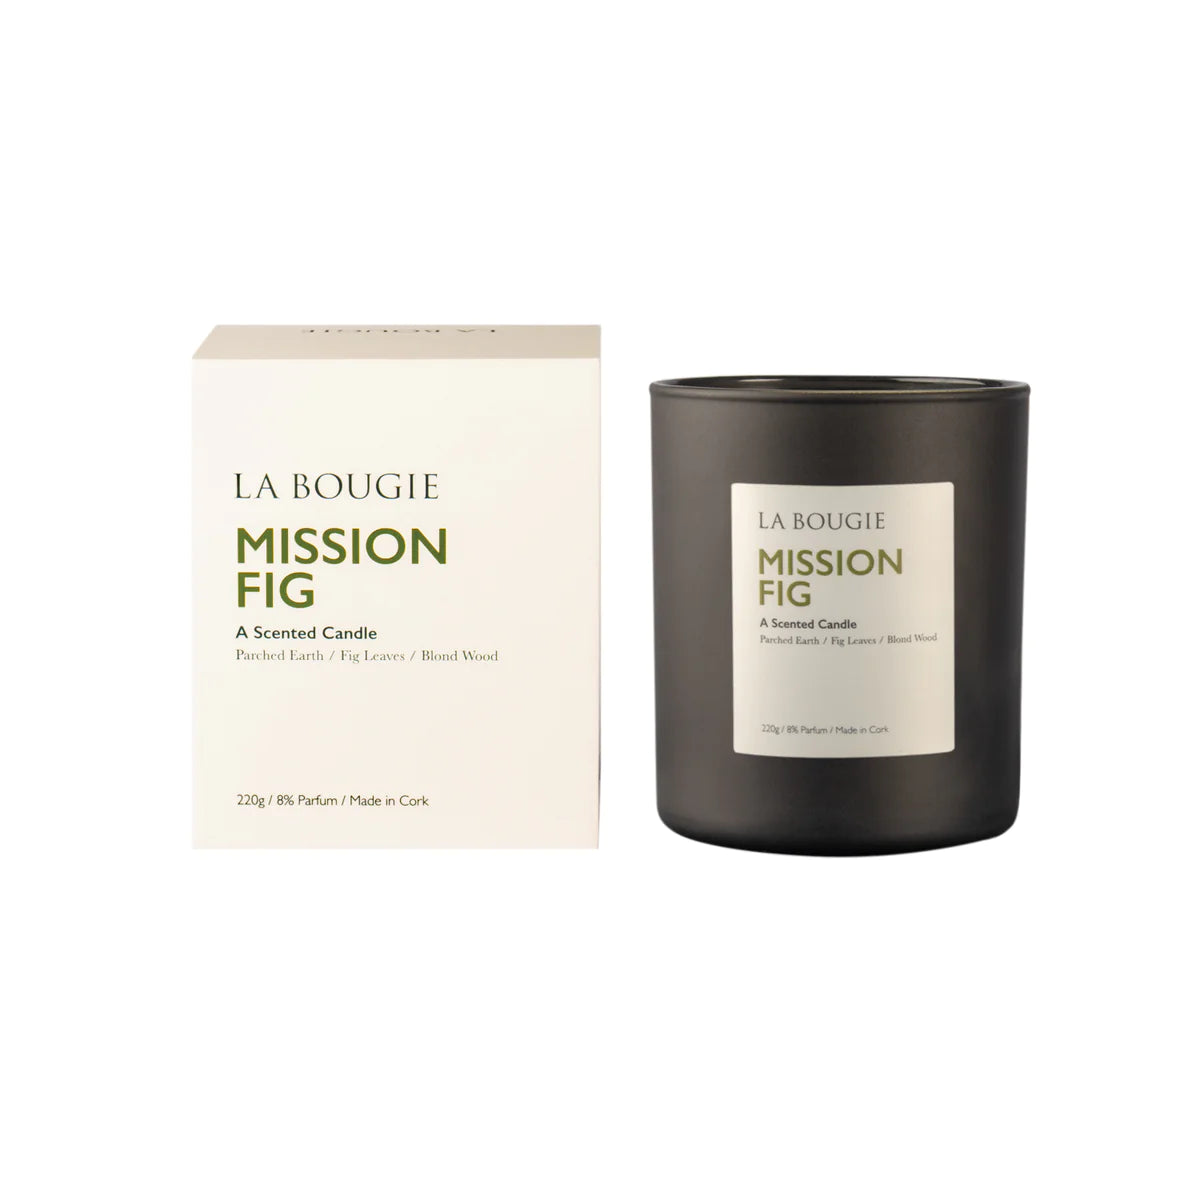 La Bougie Luxury Candle - Mission Fig